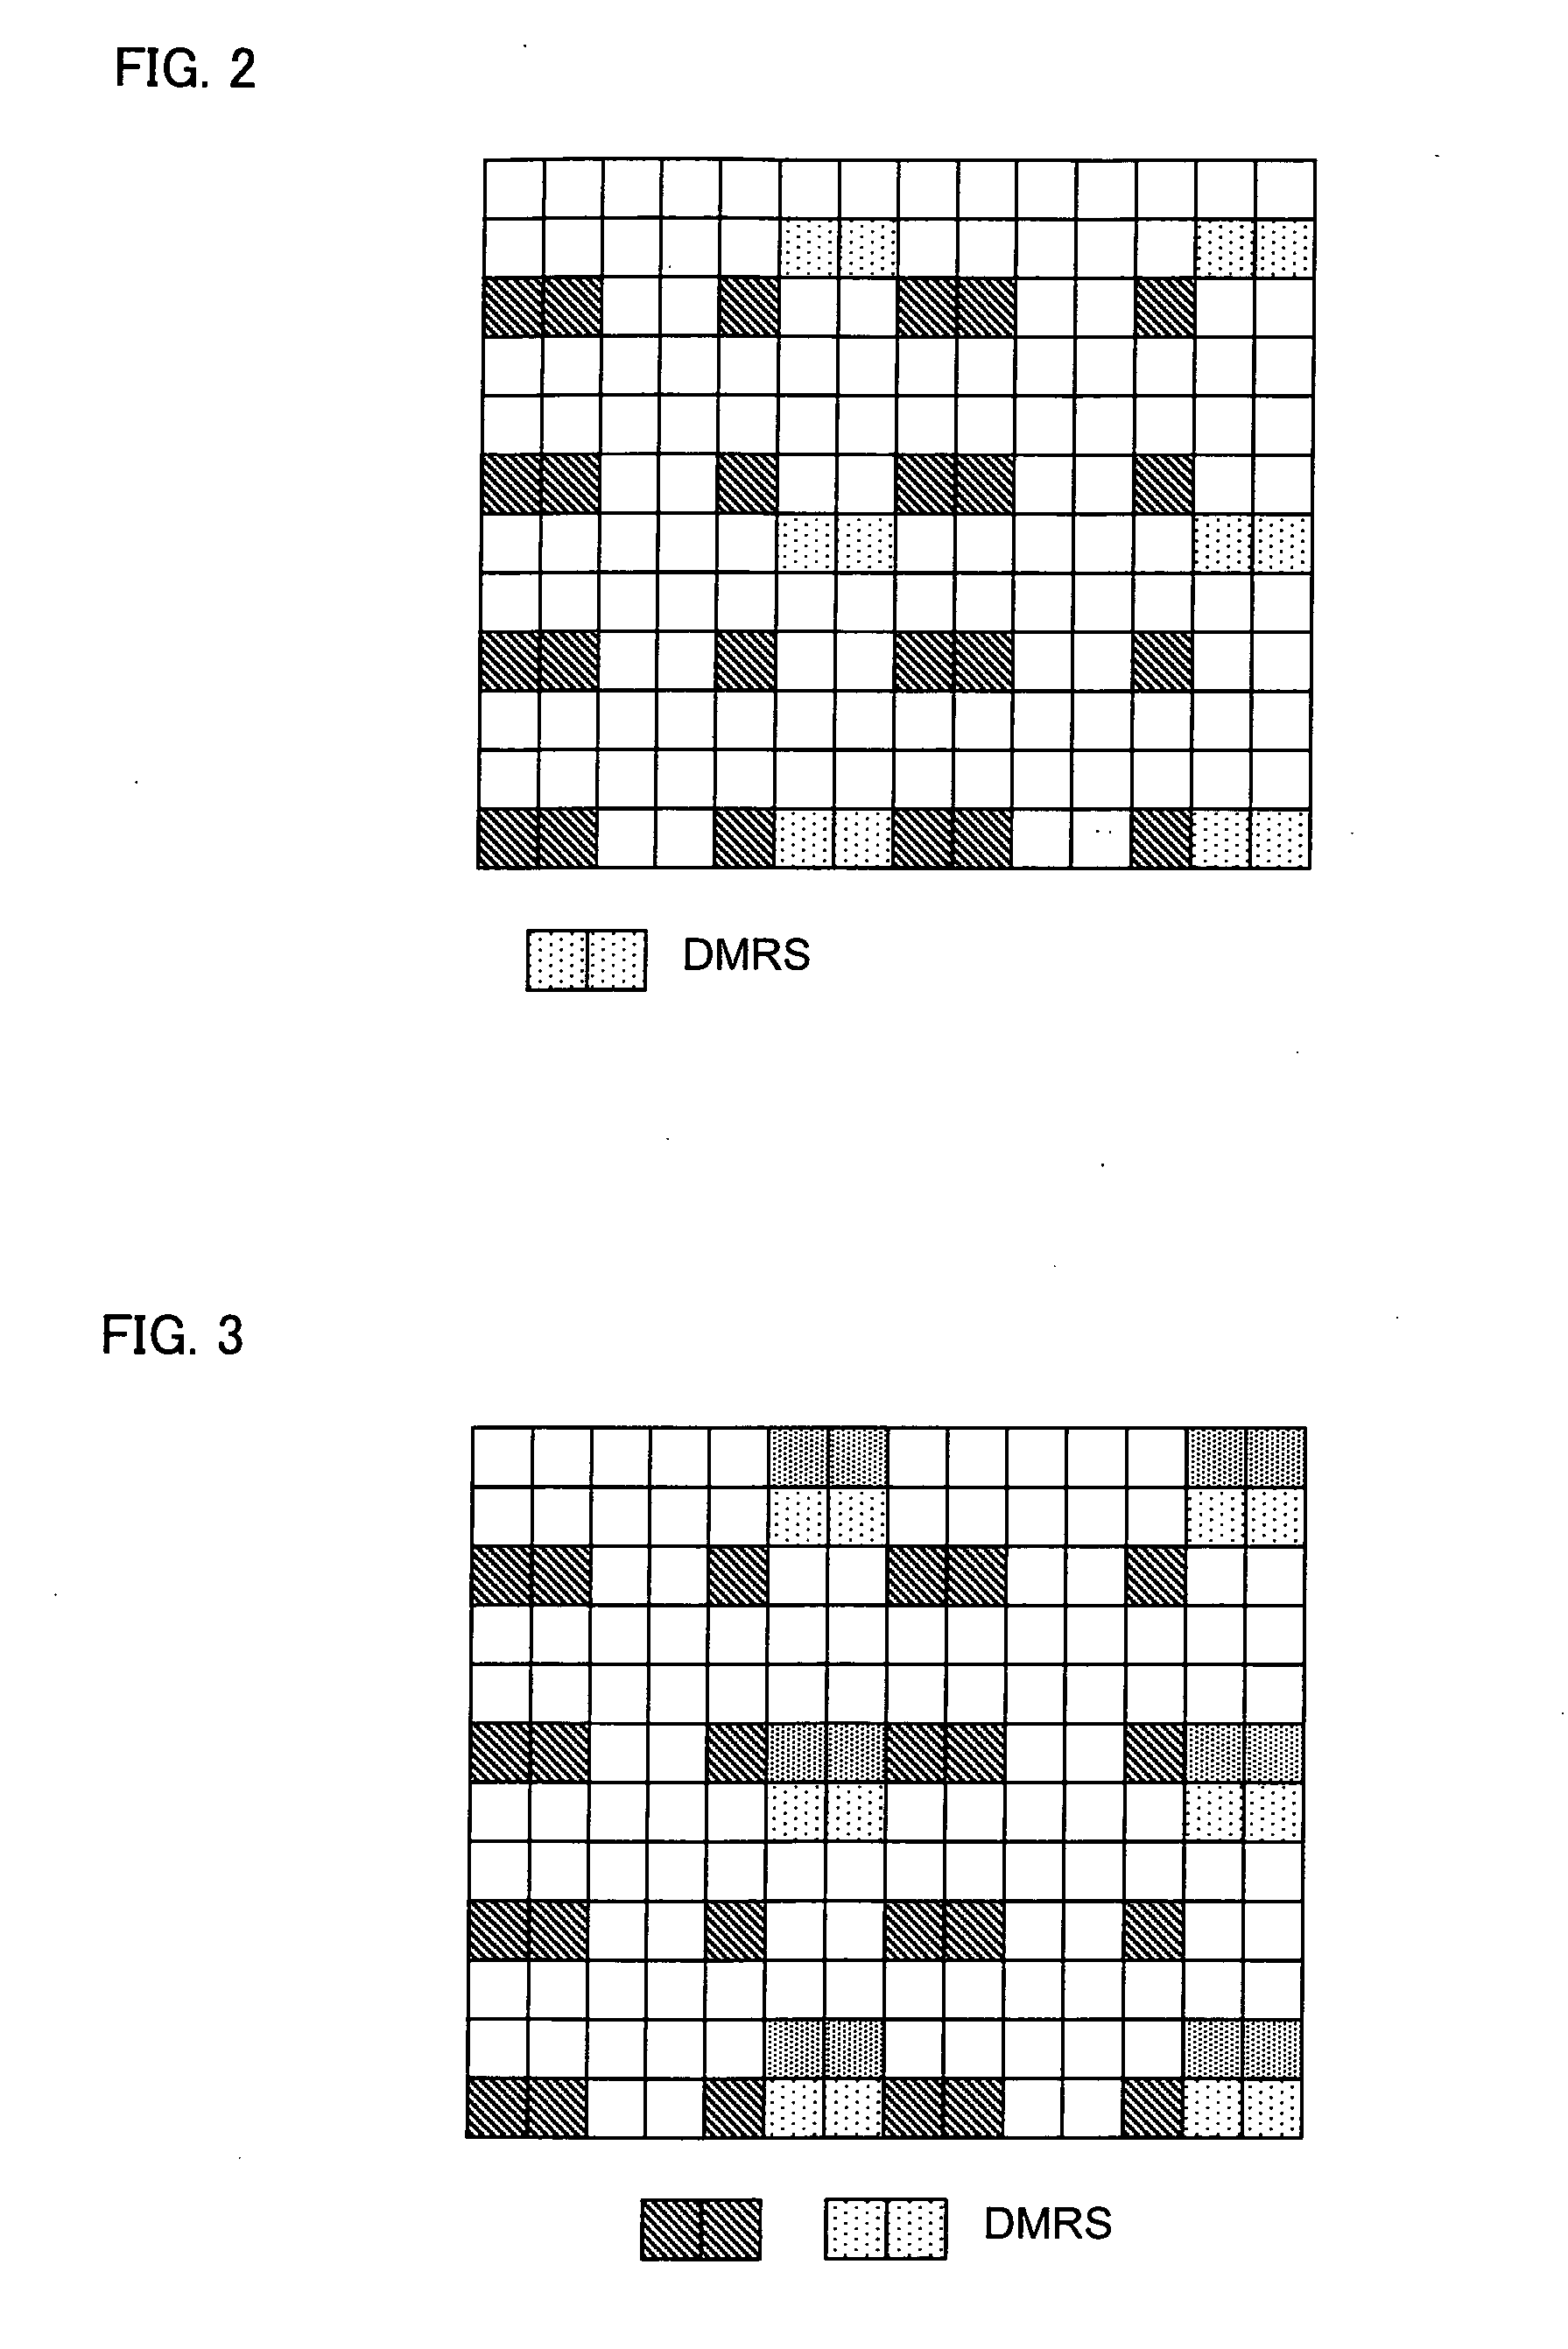 Method of notifying resource allocation for demodulation reference signals